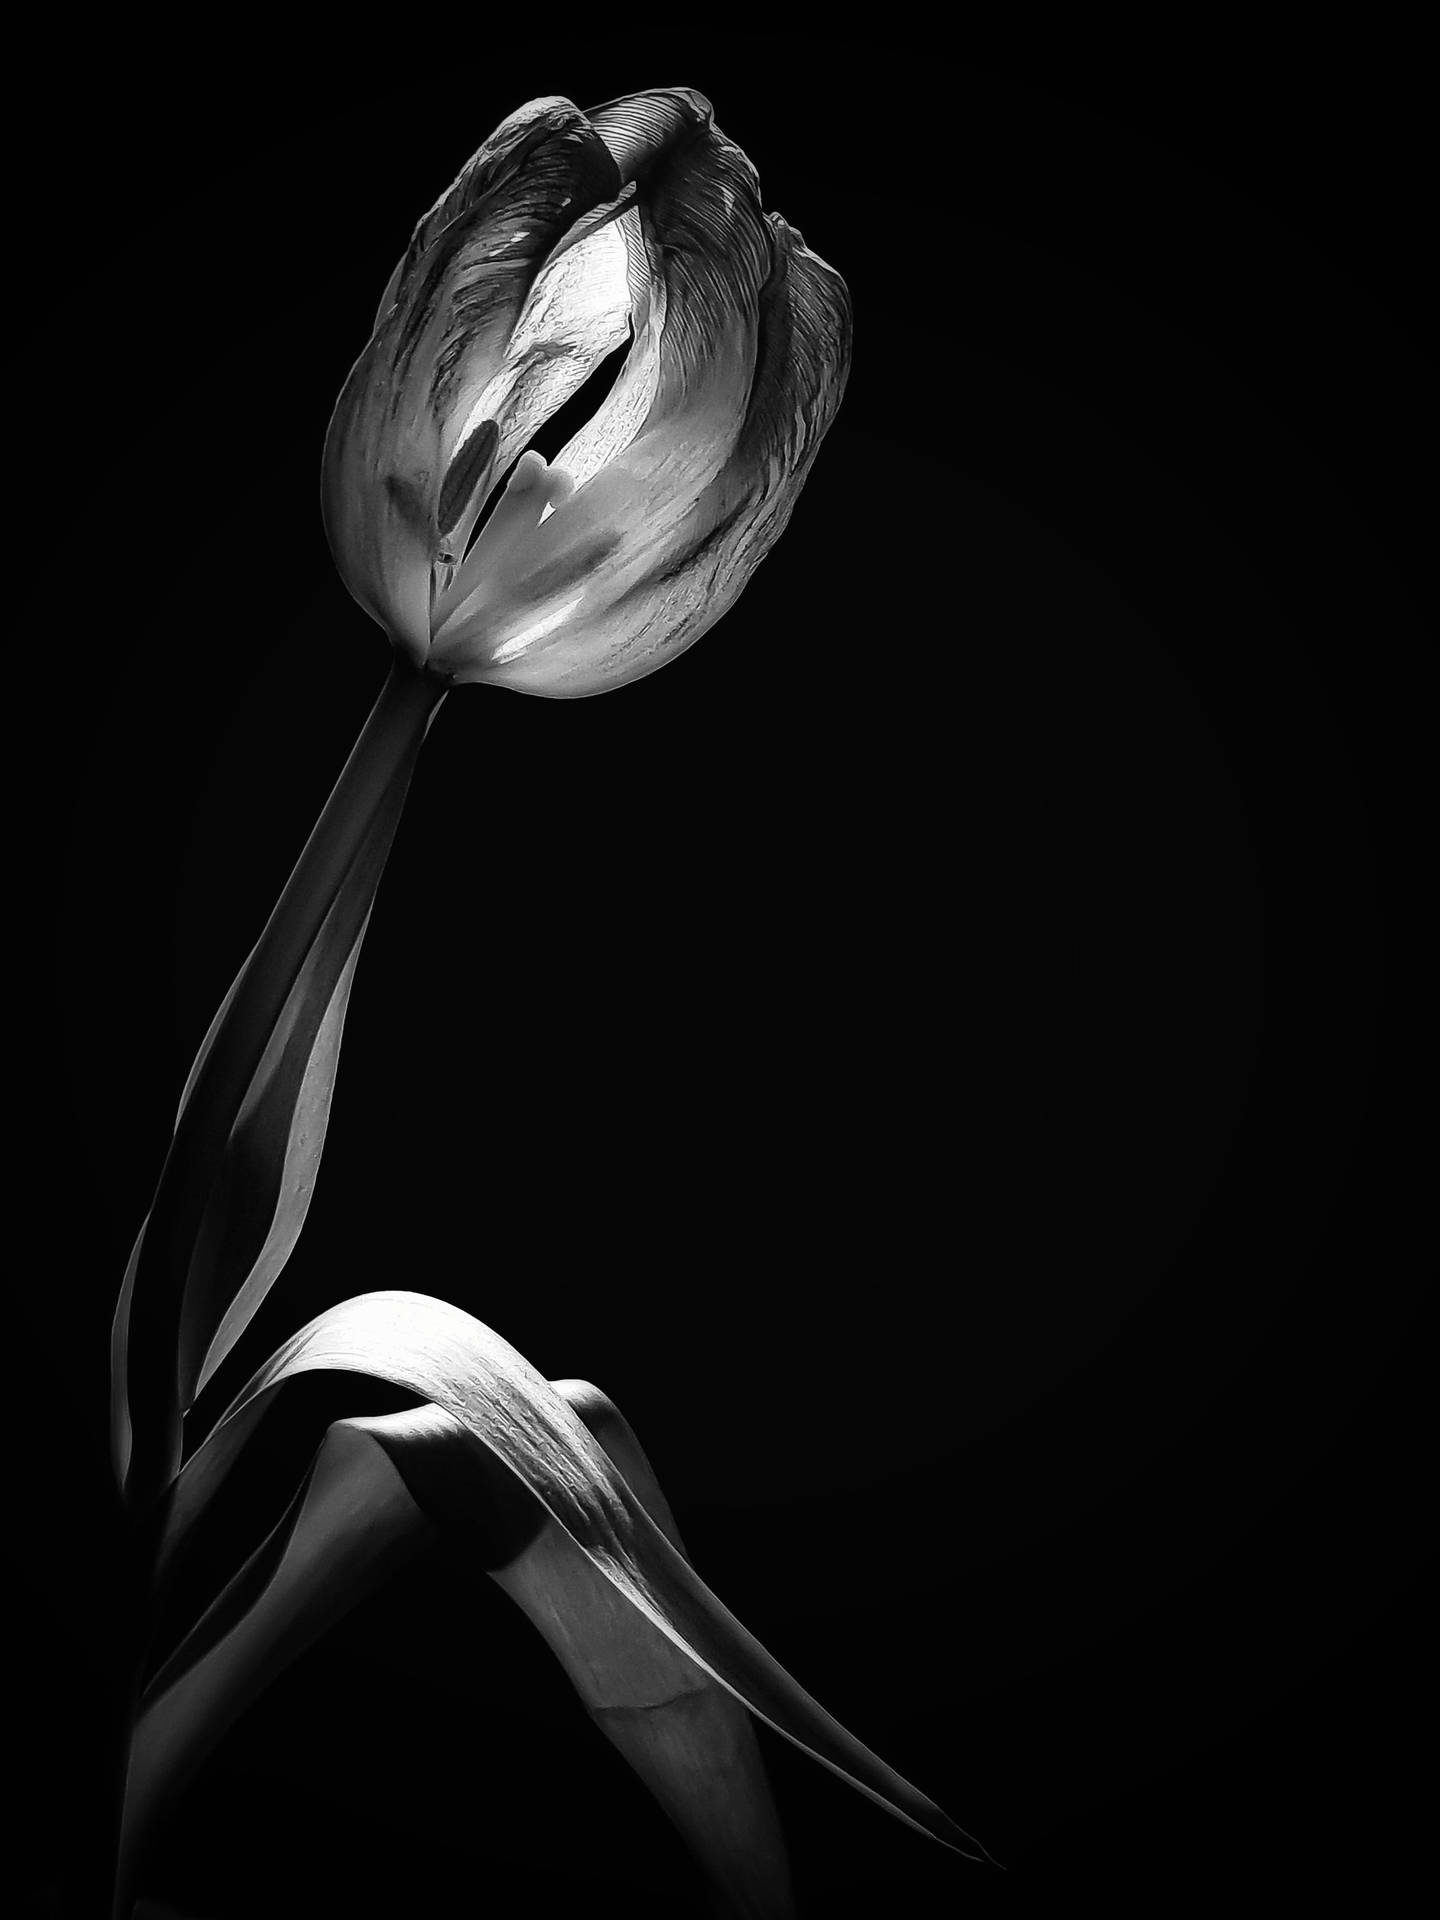 Black And White Flower Closed Wallpaper